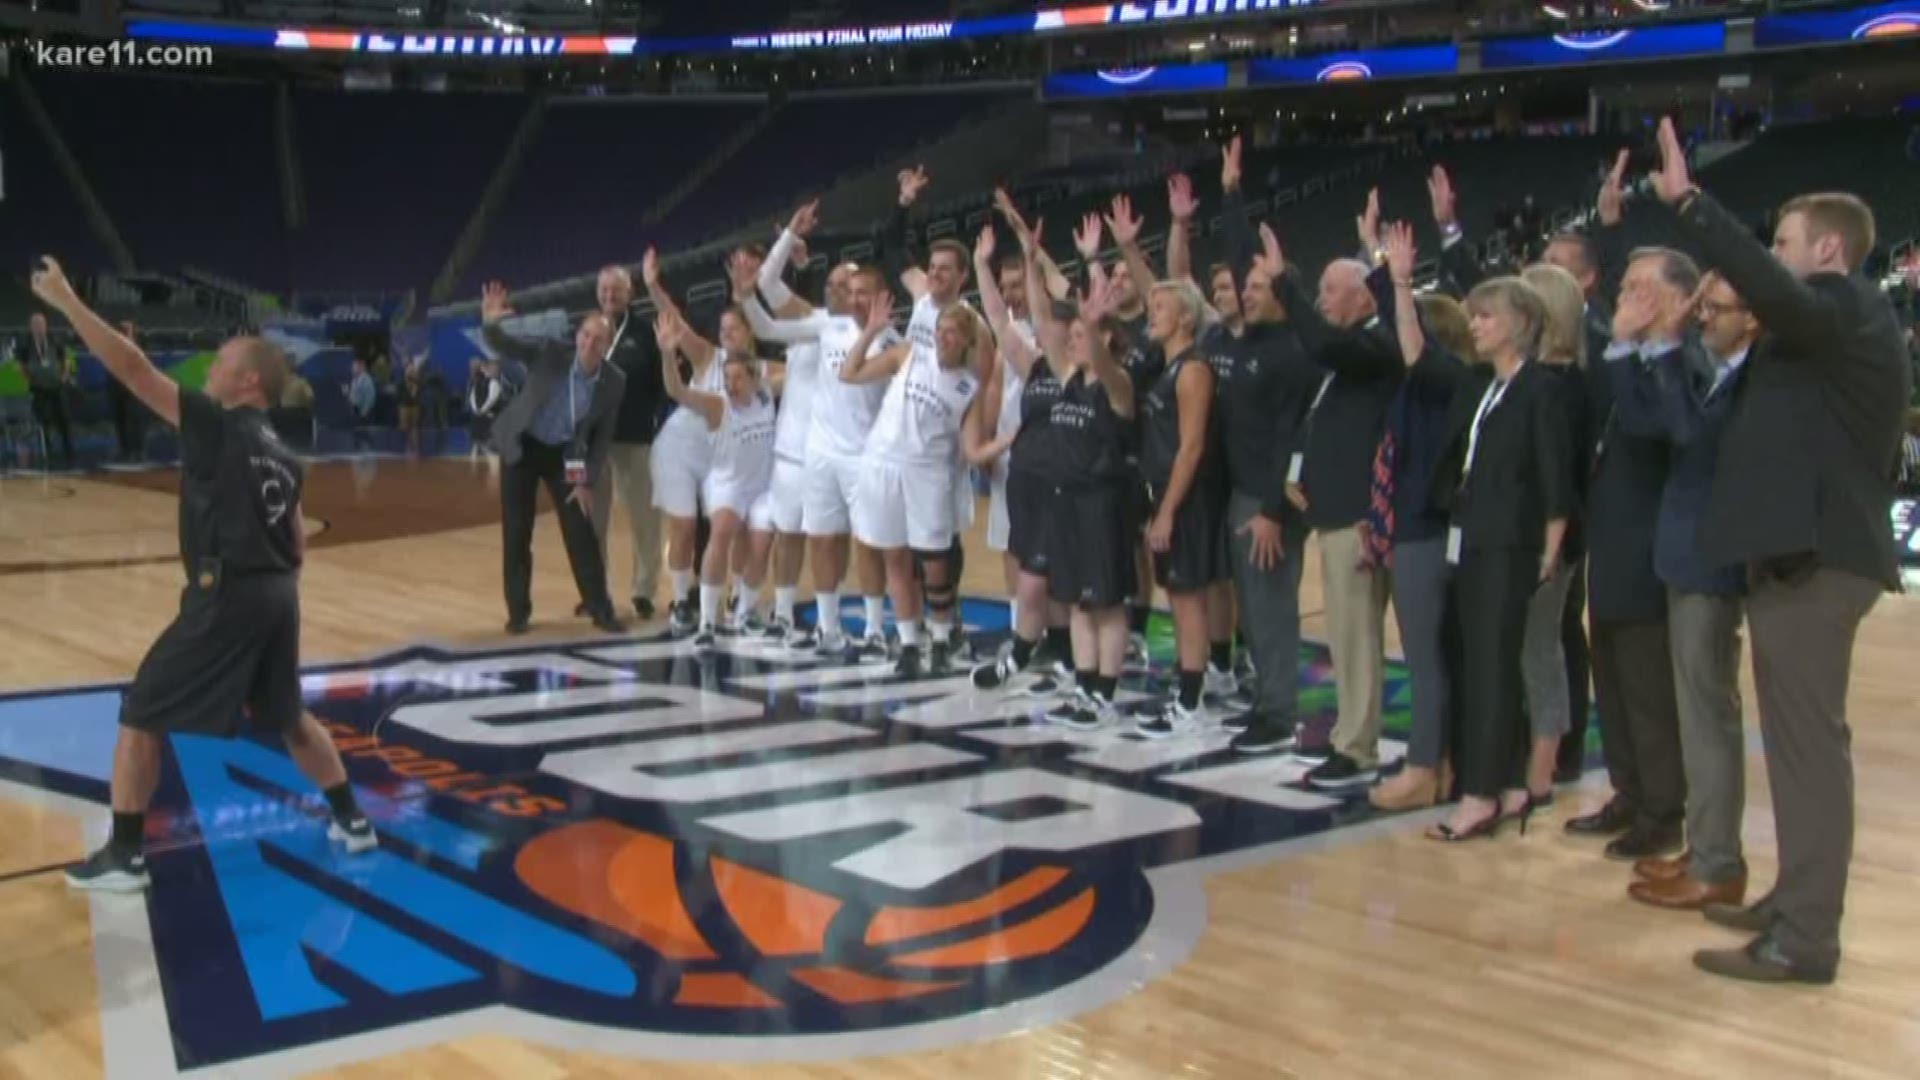 Cancer survivors, doctors and caregivers get on the Final Four court at U.S. Bank Stadium to try and raise awareness.